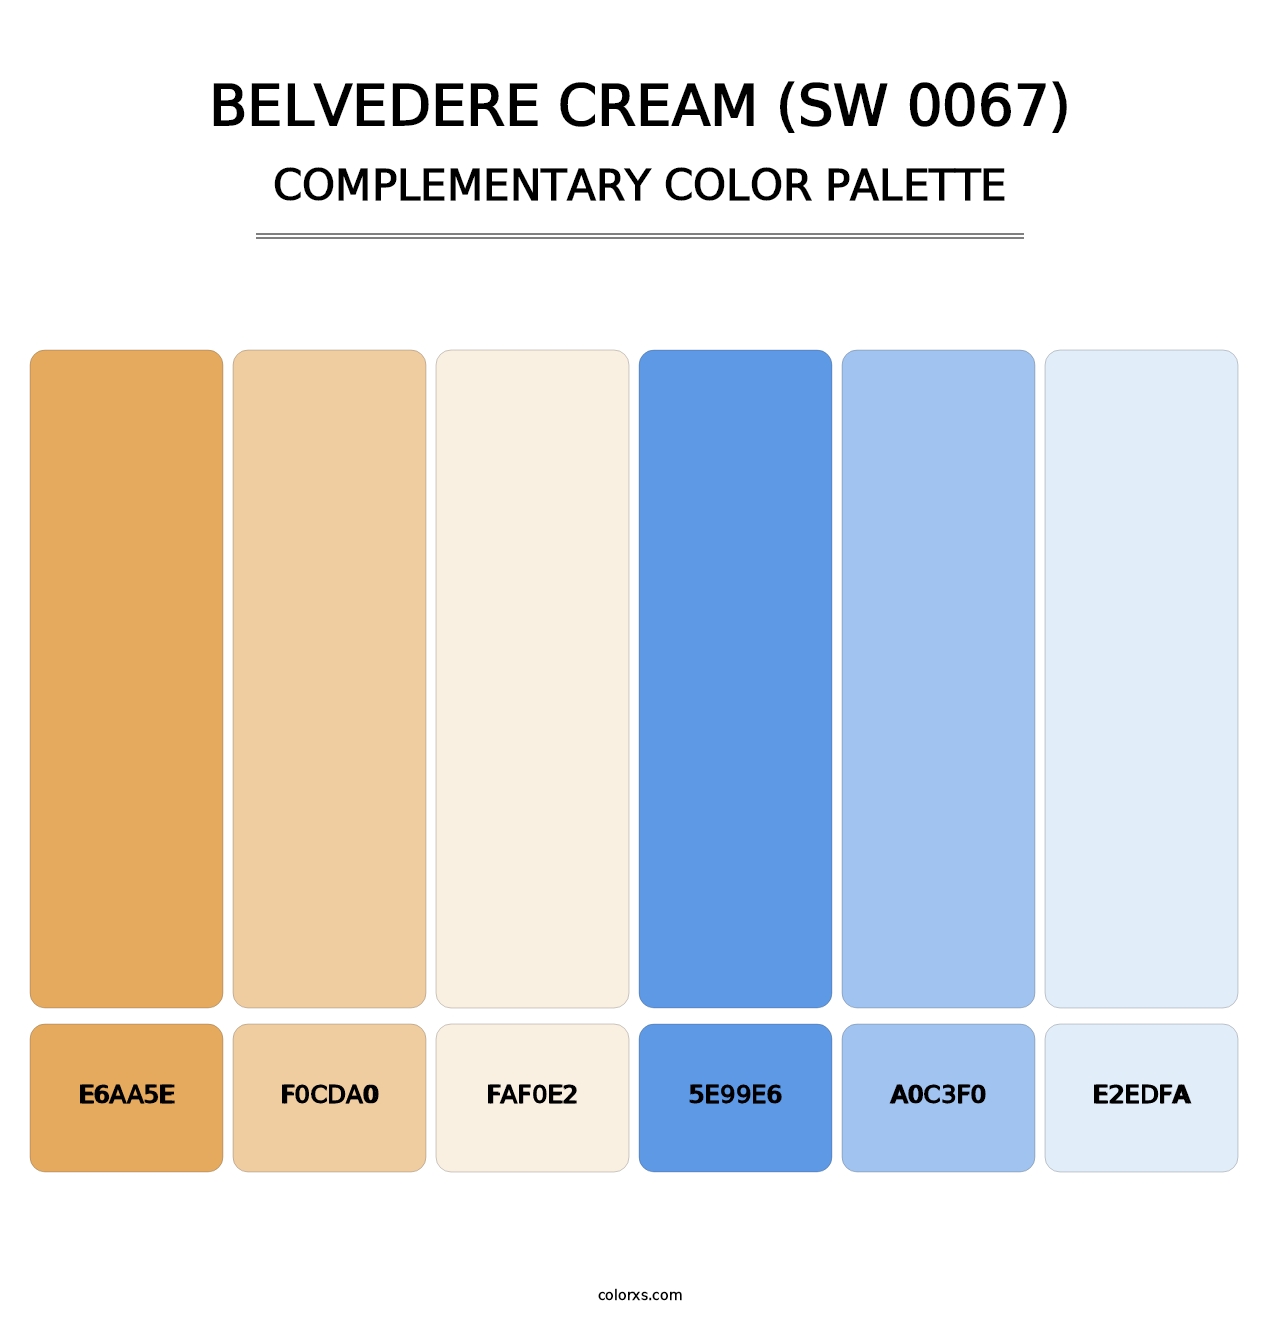 Belvedere Cream (SW 0067) - Complementary Color Palette